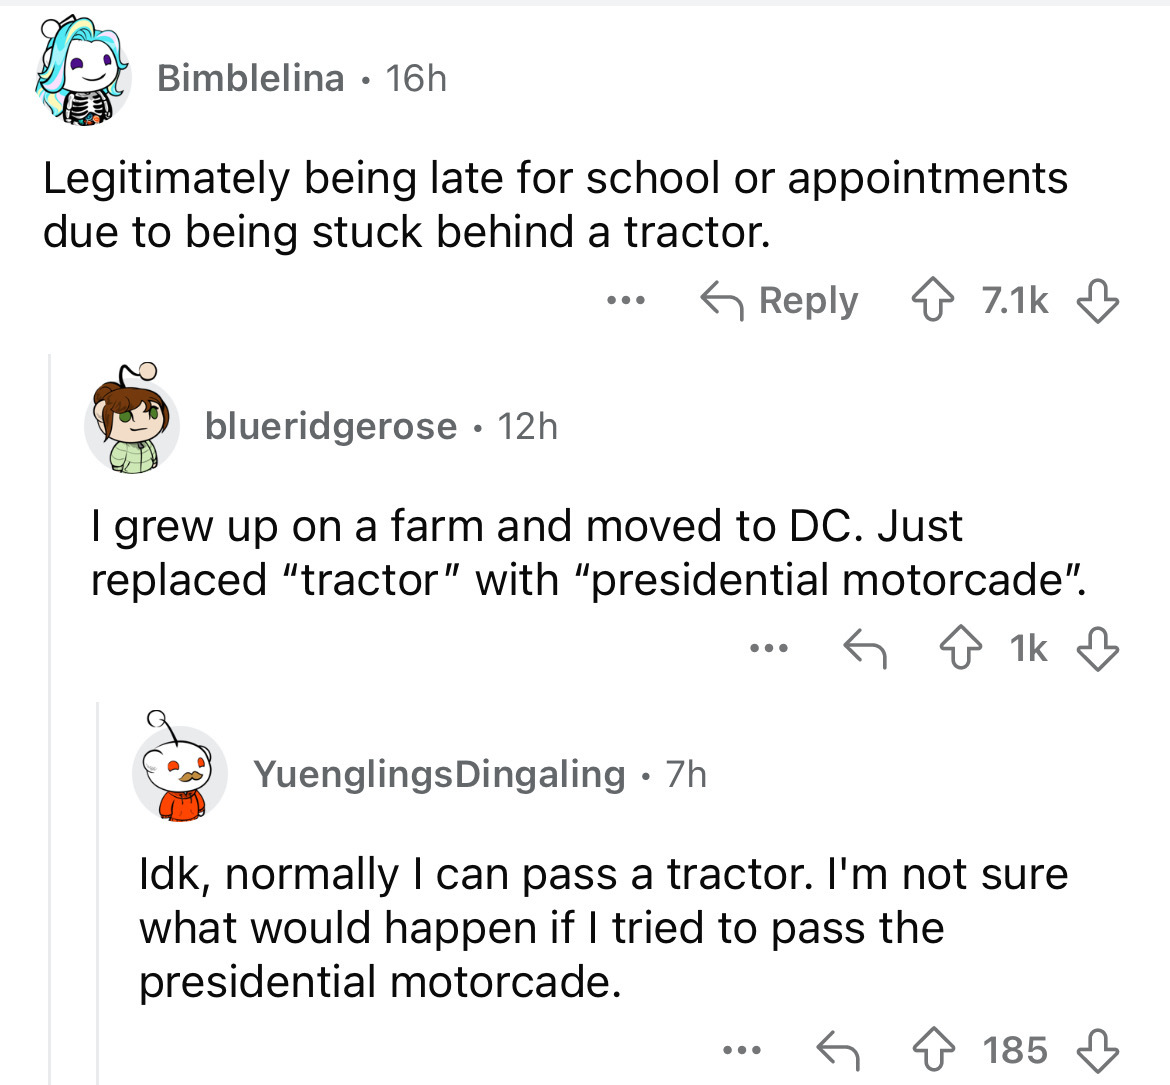 screenshot - Bimblelina 16h Legitimately being late for school or appointments due to being stuck behind a tractor. blueridgerose 12h. ... I grew up on a farm and moved to Dc. Just replaced "tractor" with "presidential motorcade". ... 1k YuenglingsDingali